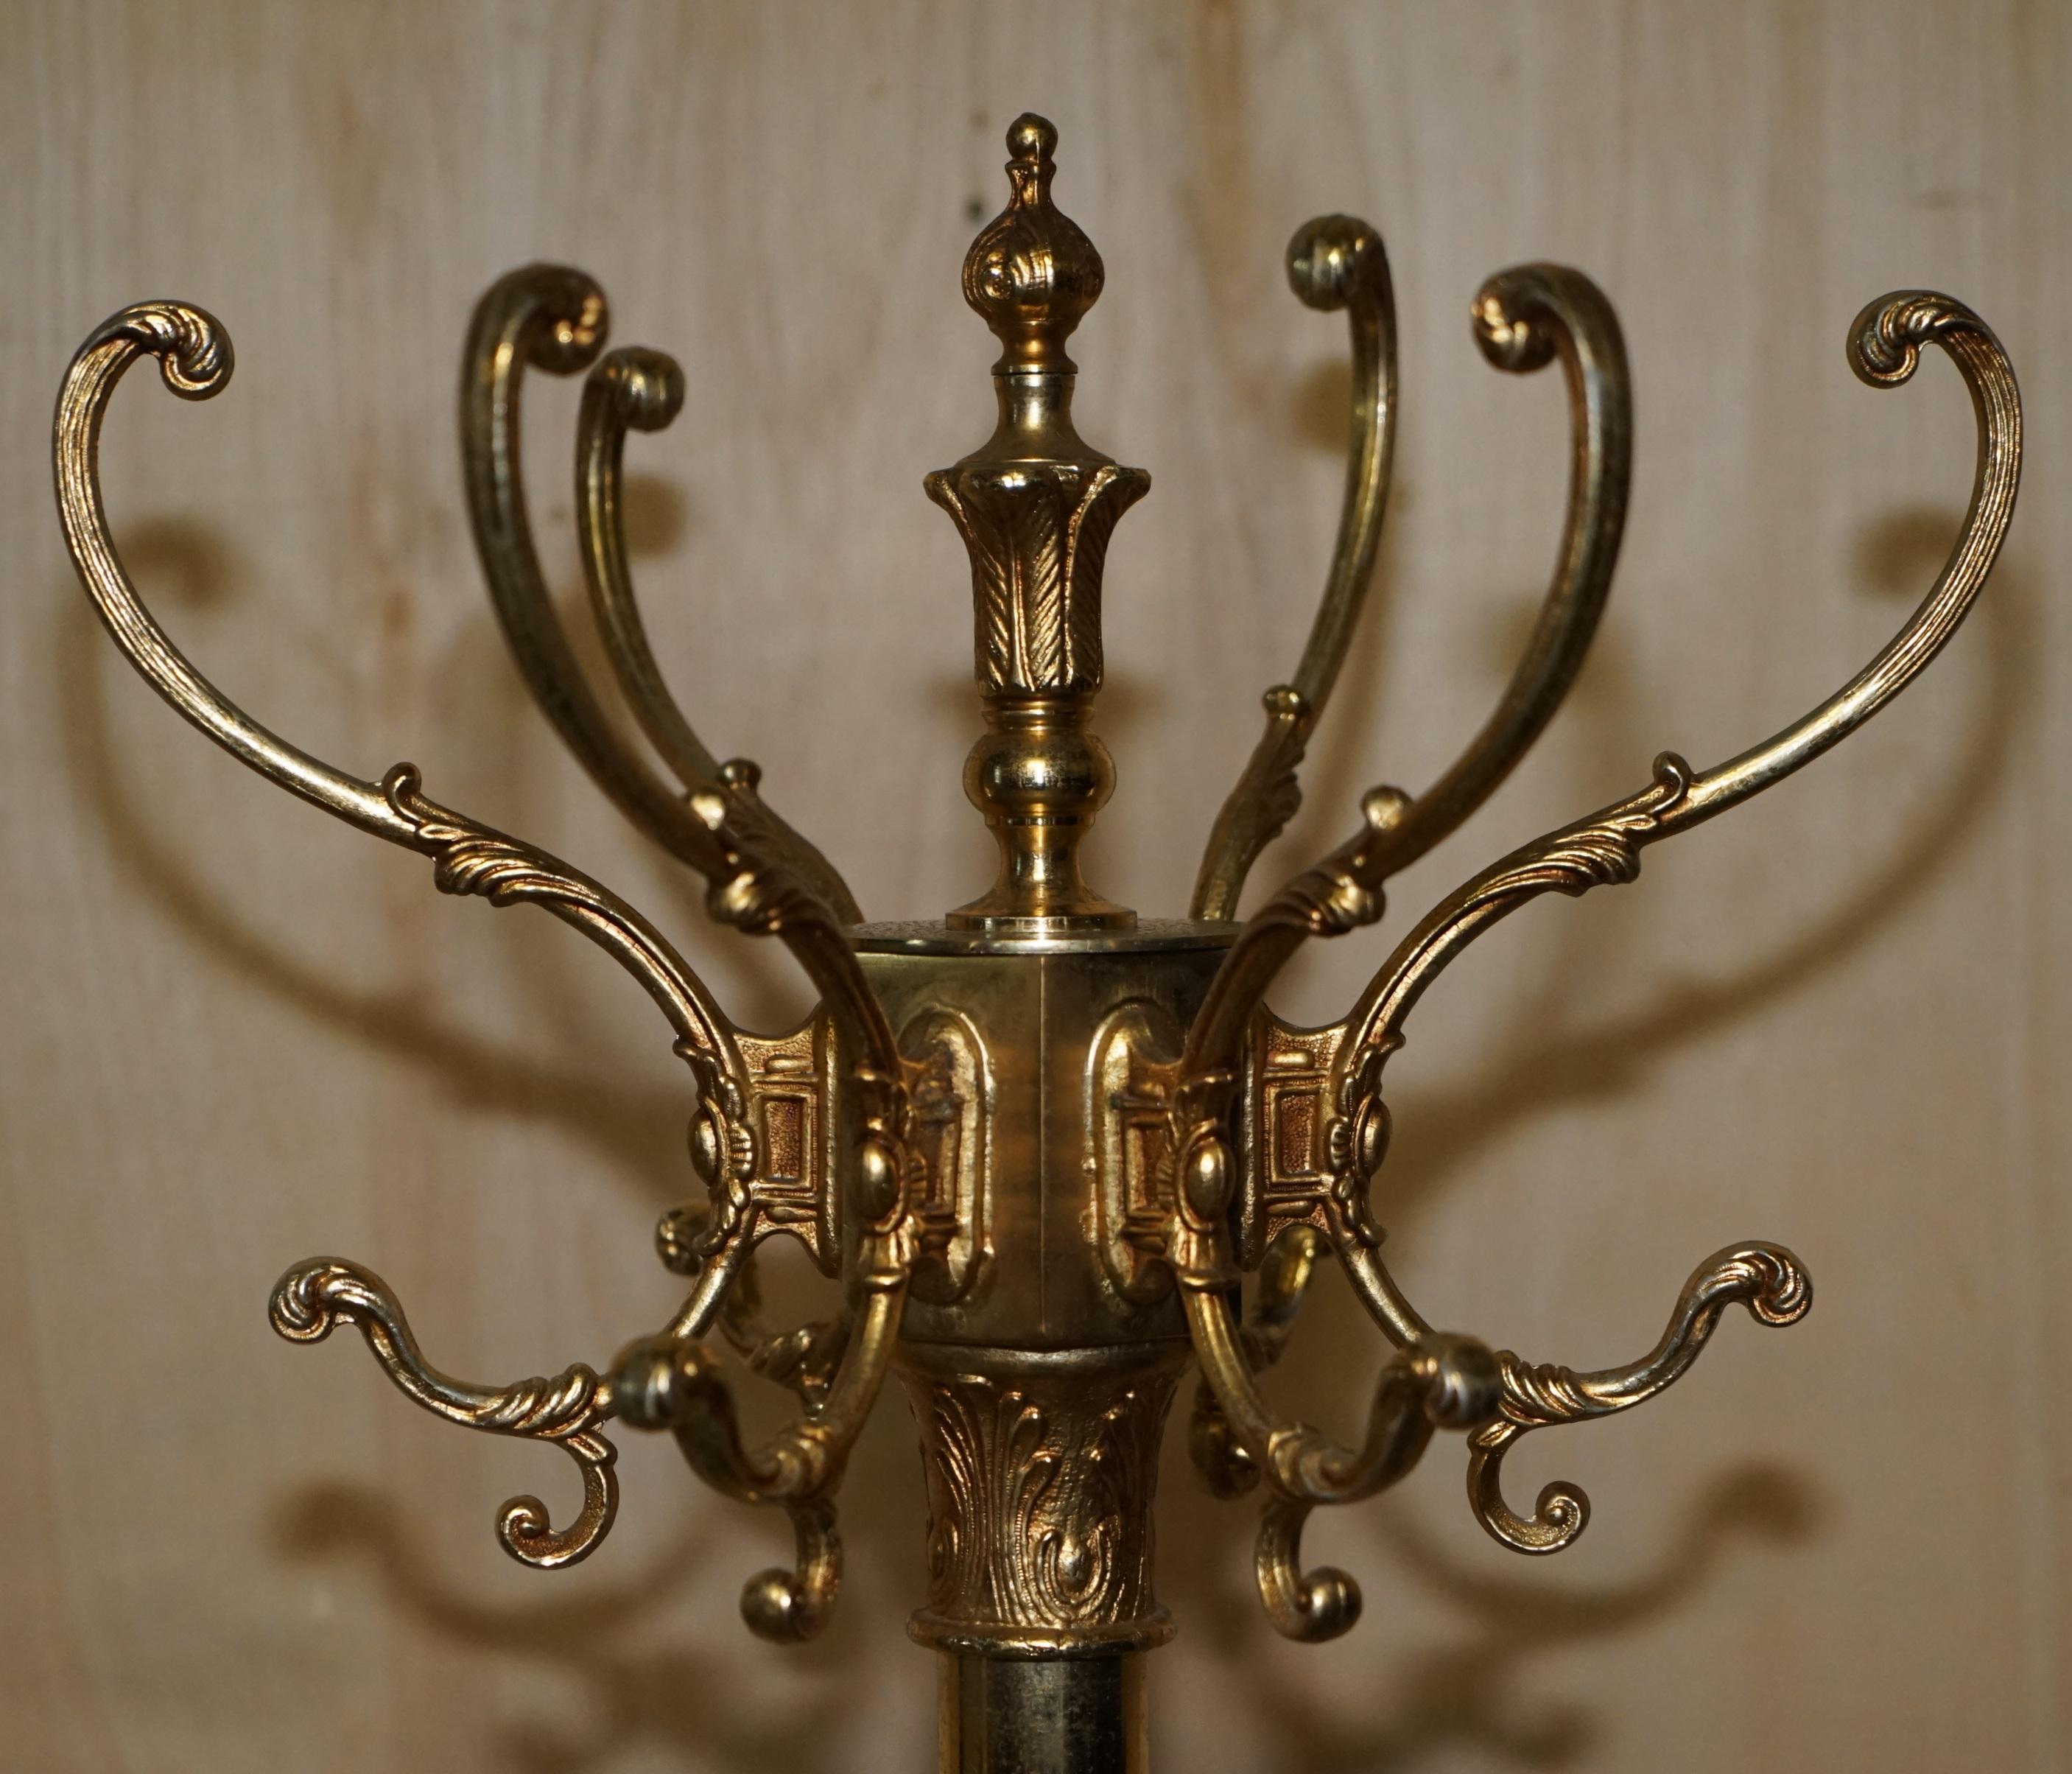 We are delighted to offer for sale this stunning original English circa 1880 brass hat glove and coat stand with rare Dolphin tripod base.

This is a bit of a unicorn in the world of coat stands, it’s a very classically English style, I've not